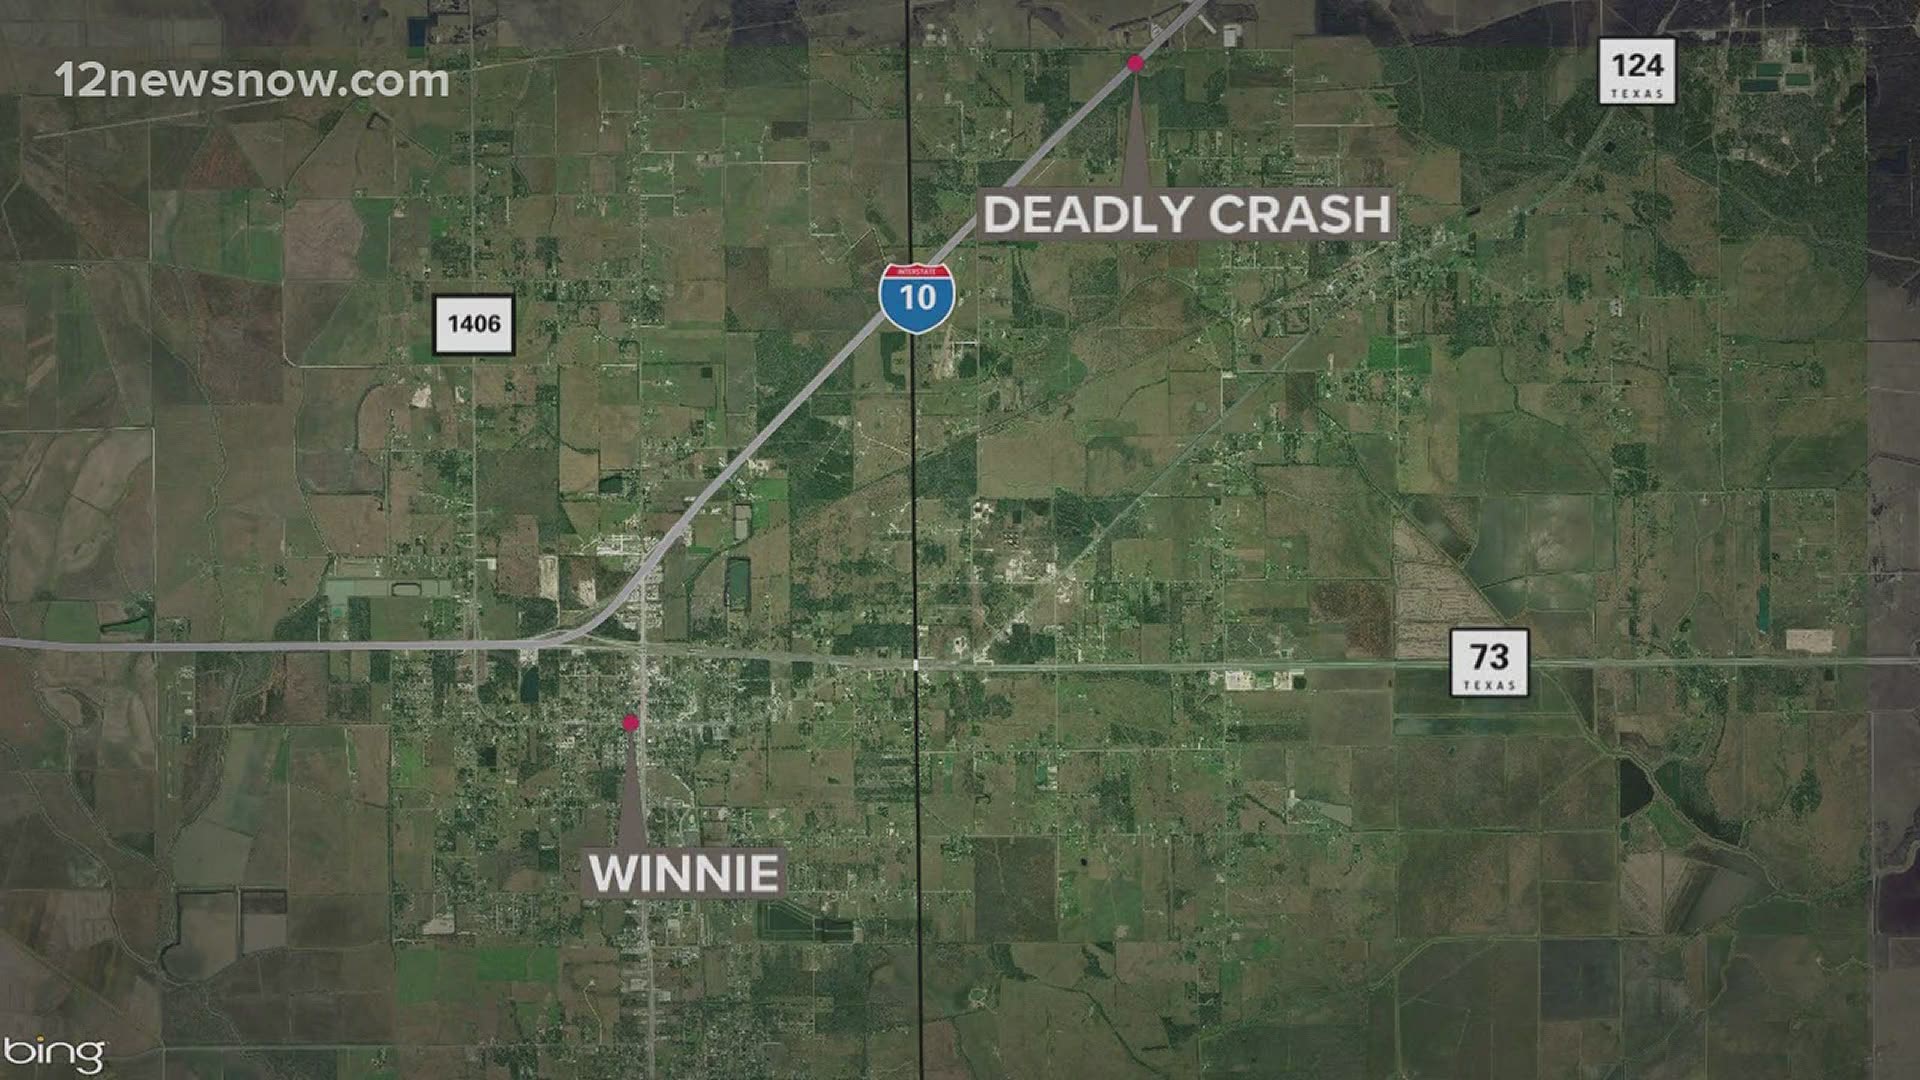 The Texas Department of Public Safety is investigating a deadly auto-pedestrian crash on Interstate 10 at the Jefferson County/Chambers County line.